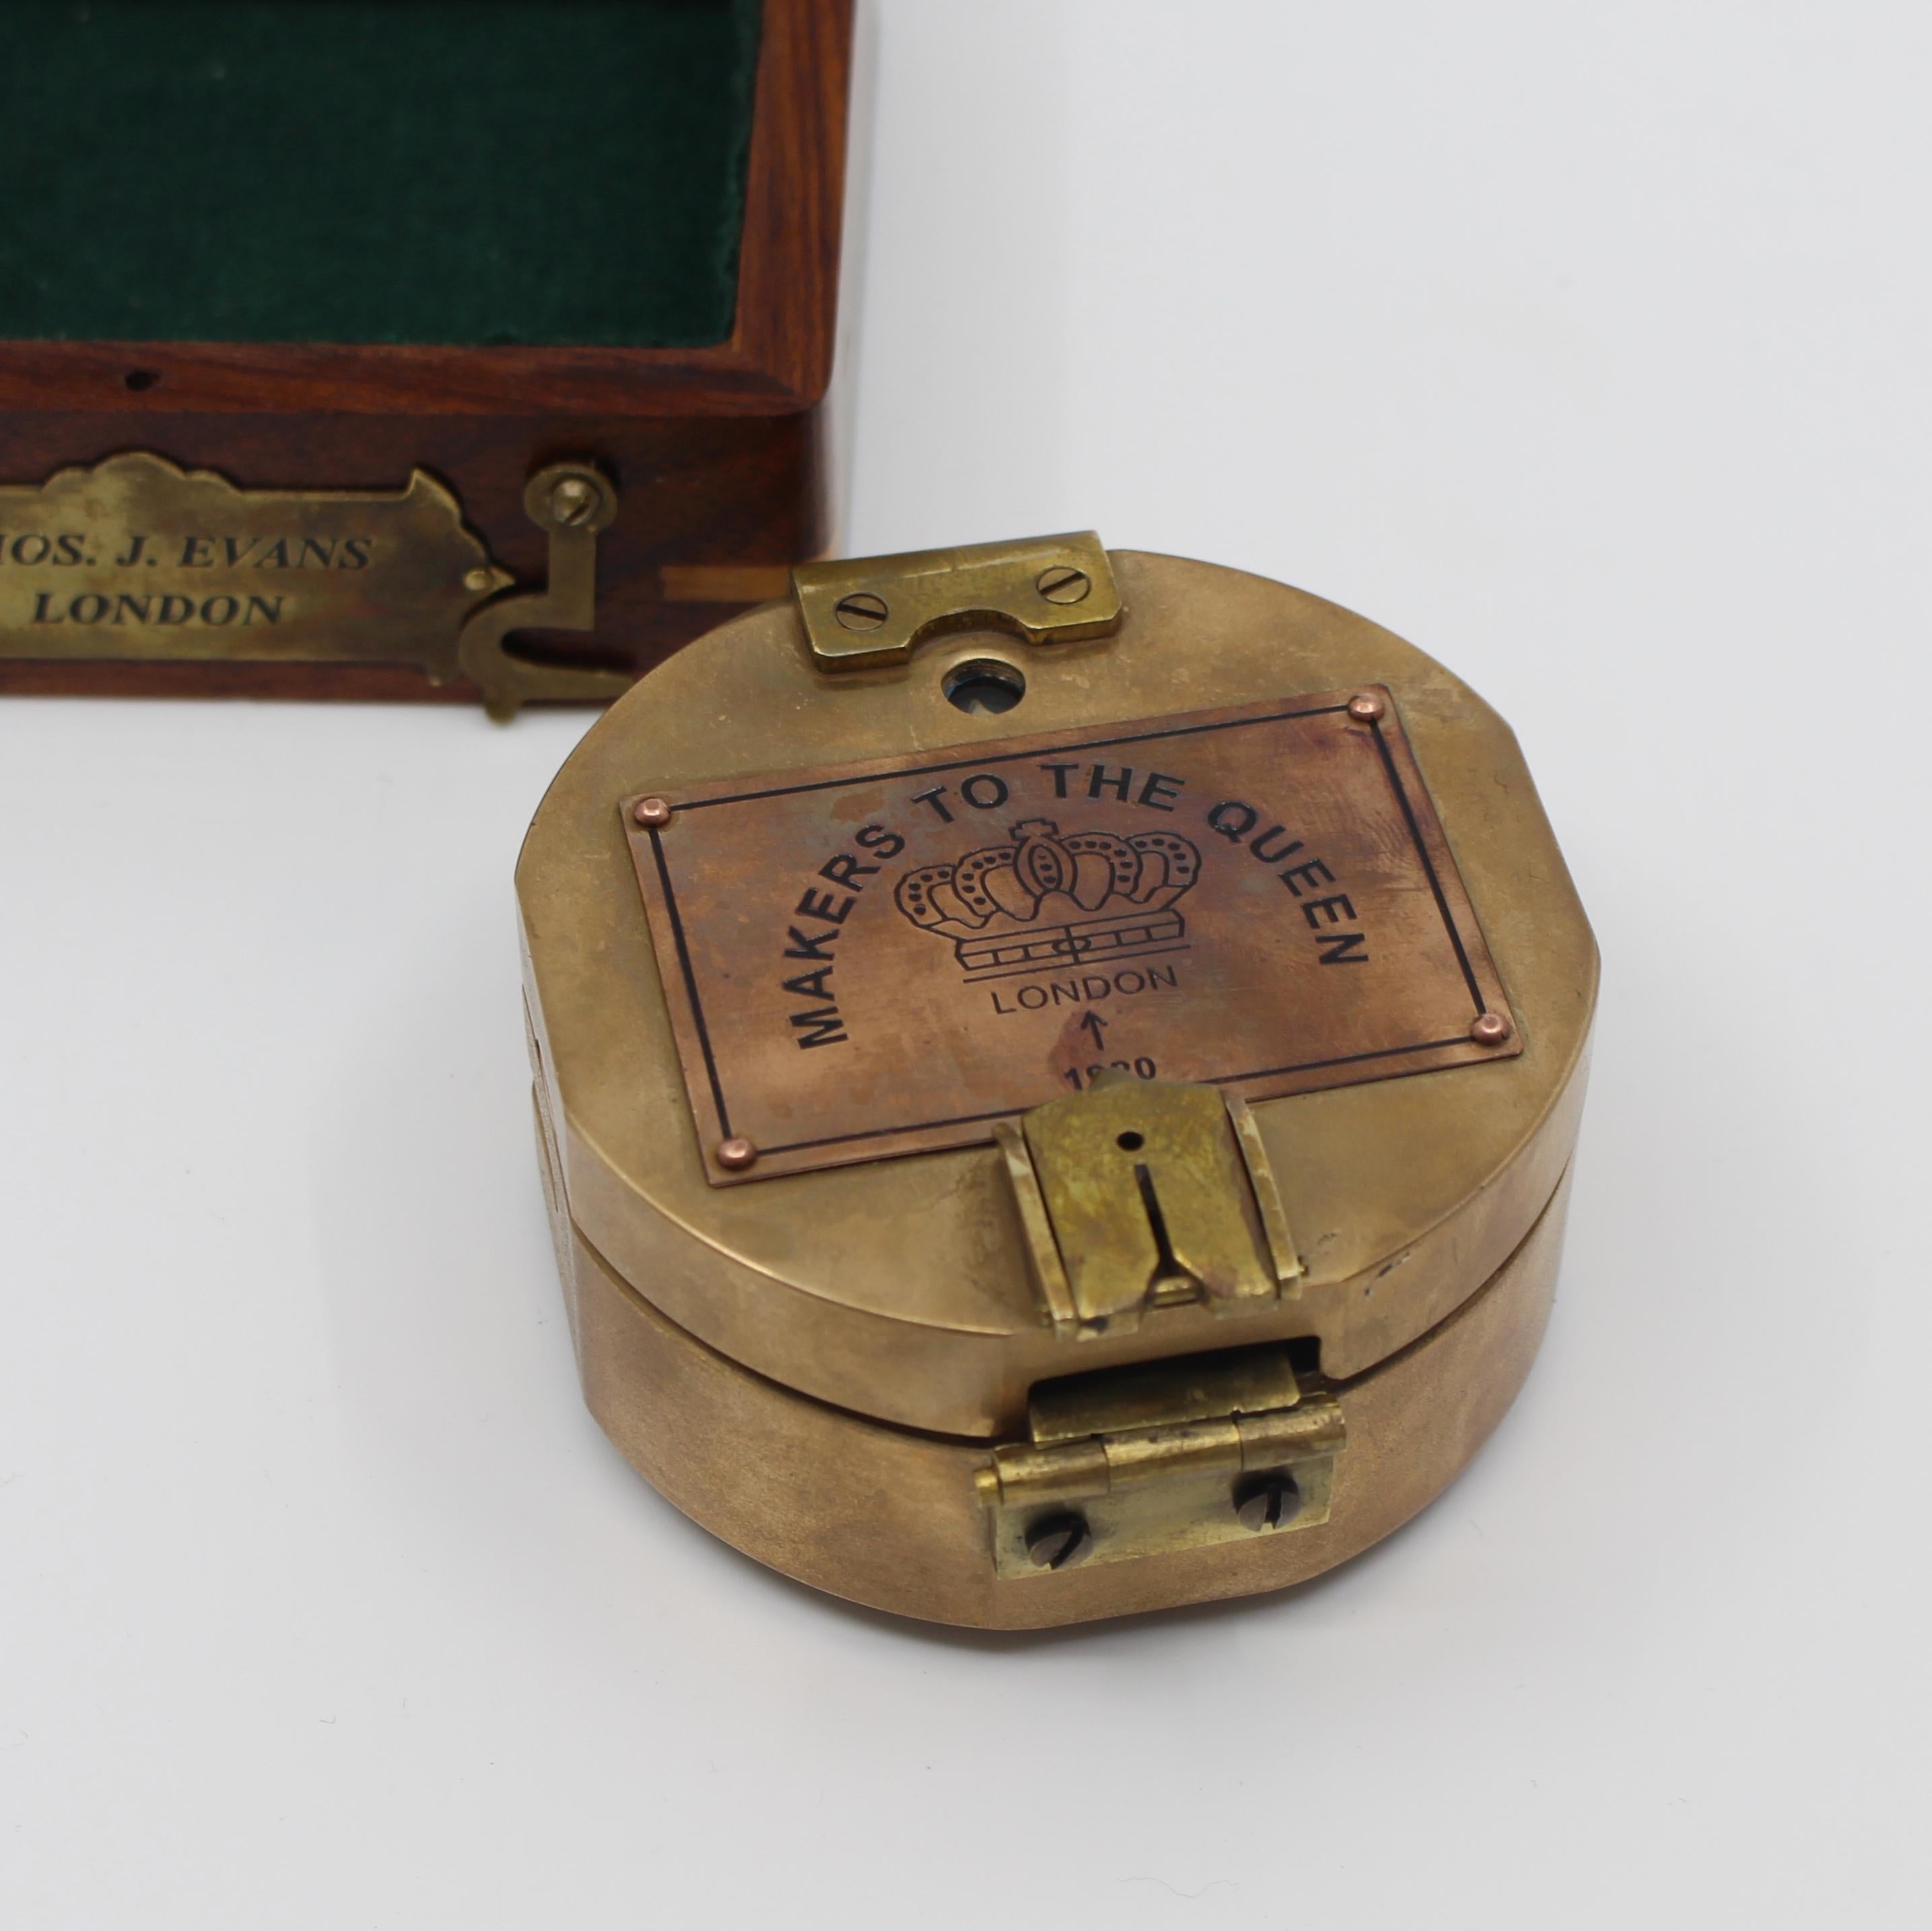 Period 20th century
Maker Thos.J.Evans, London
Case dimensions 11.5 x 10 x 6.5 cm
Condition: Good condition commensurate with age
 

 

Brass Brunton style compass by Thos.J.Evans. Plaque to top of compass reads 'Makers to the Queen